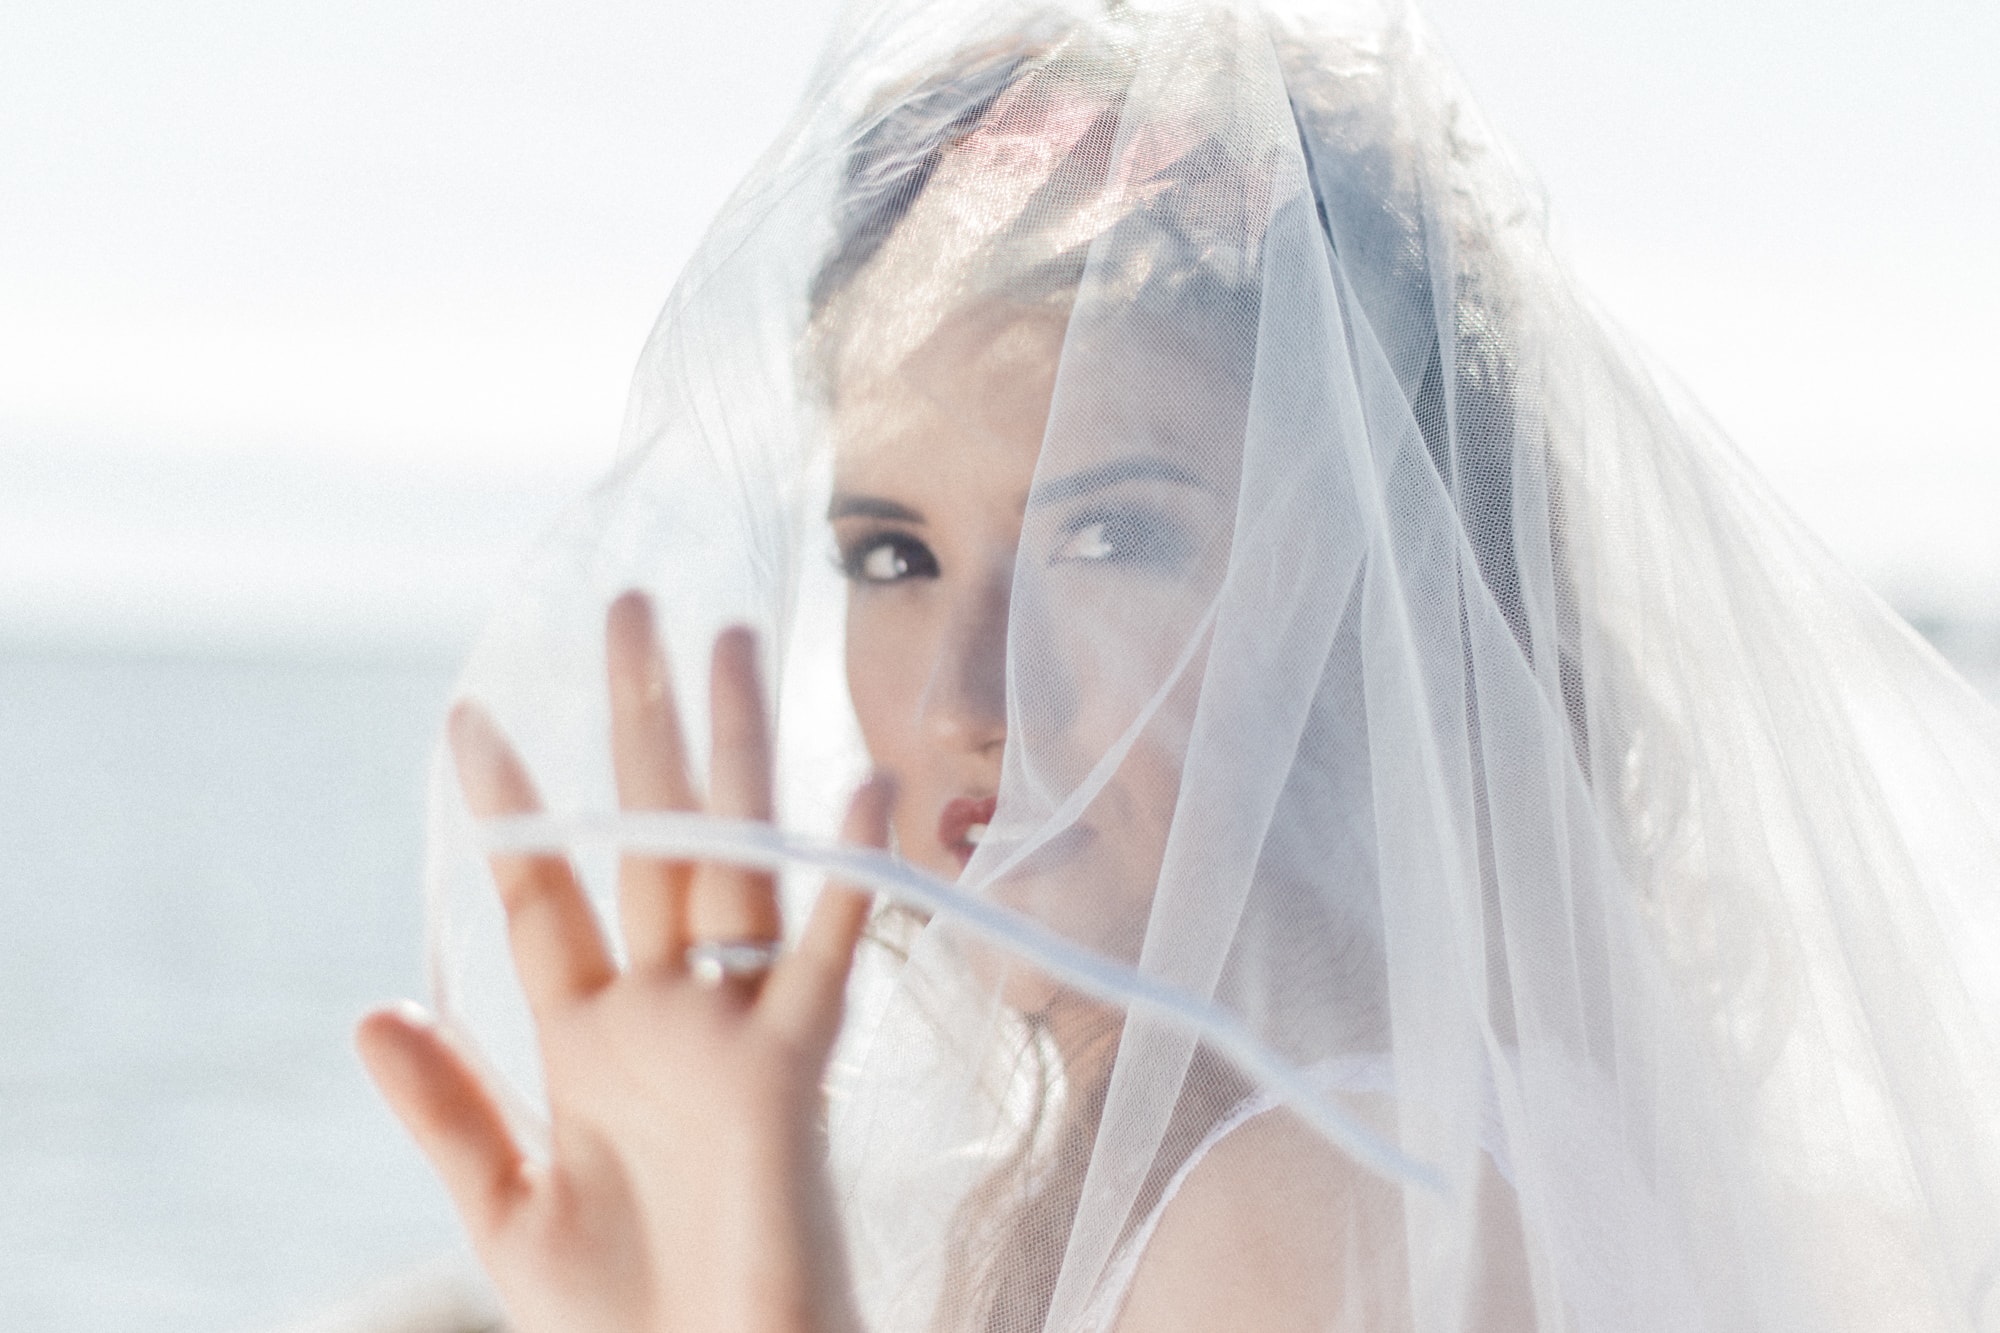 Portrait of a bride touching her veil